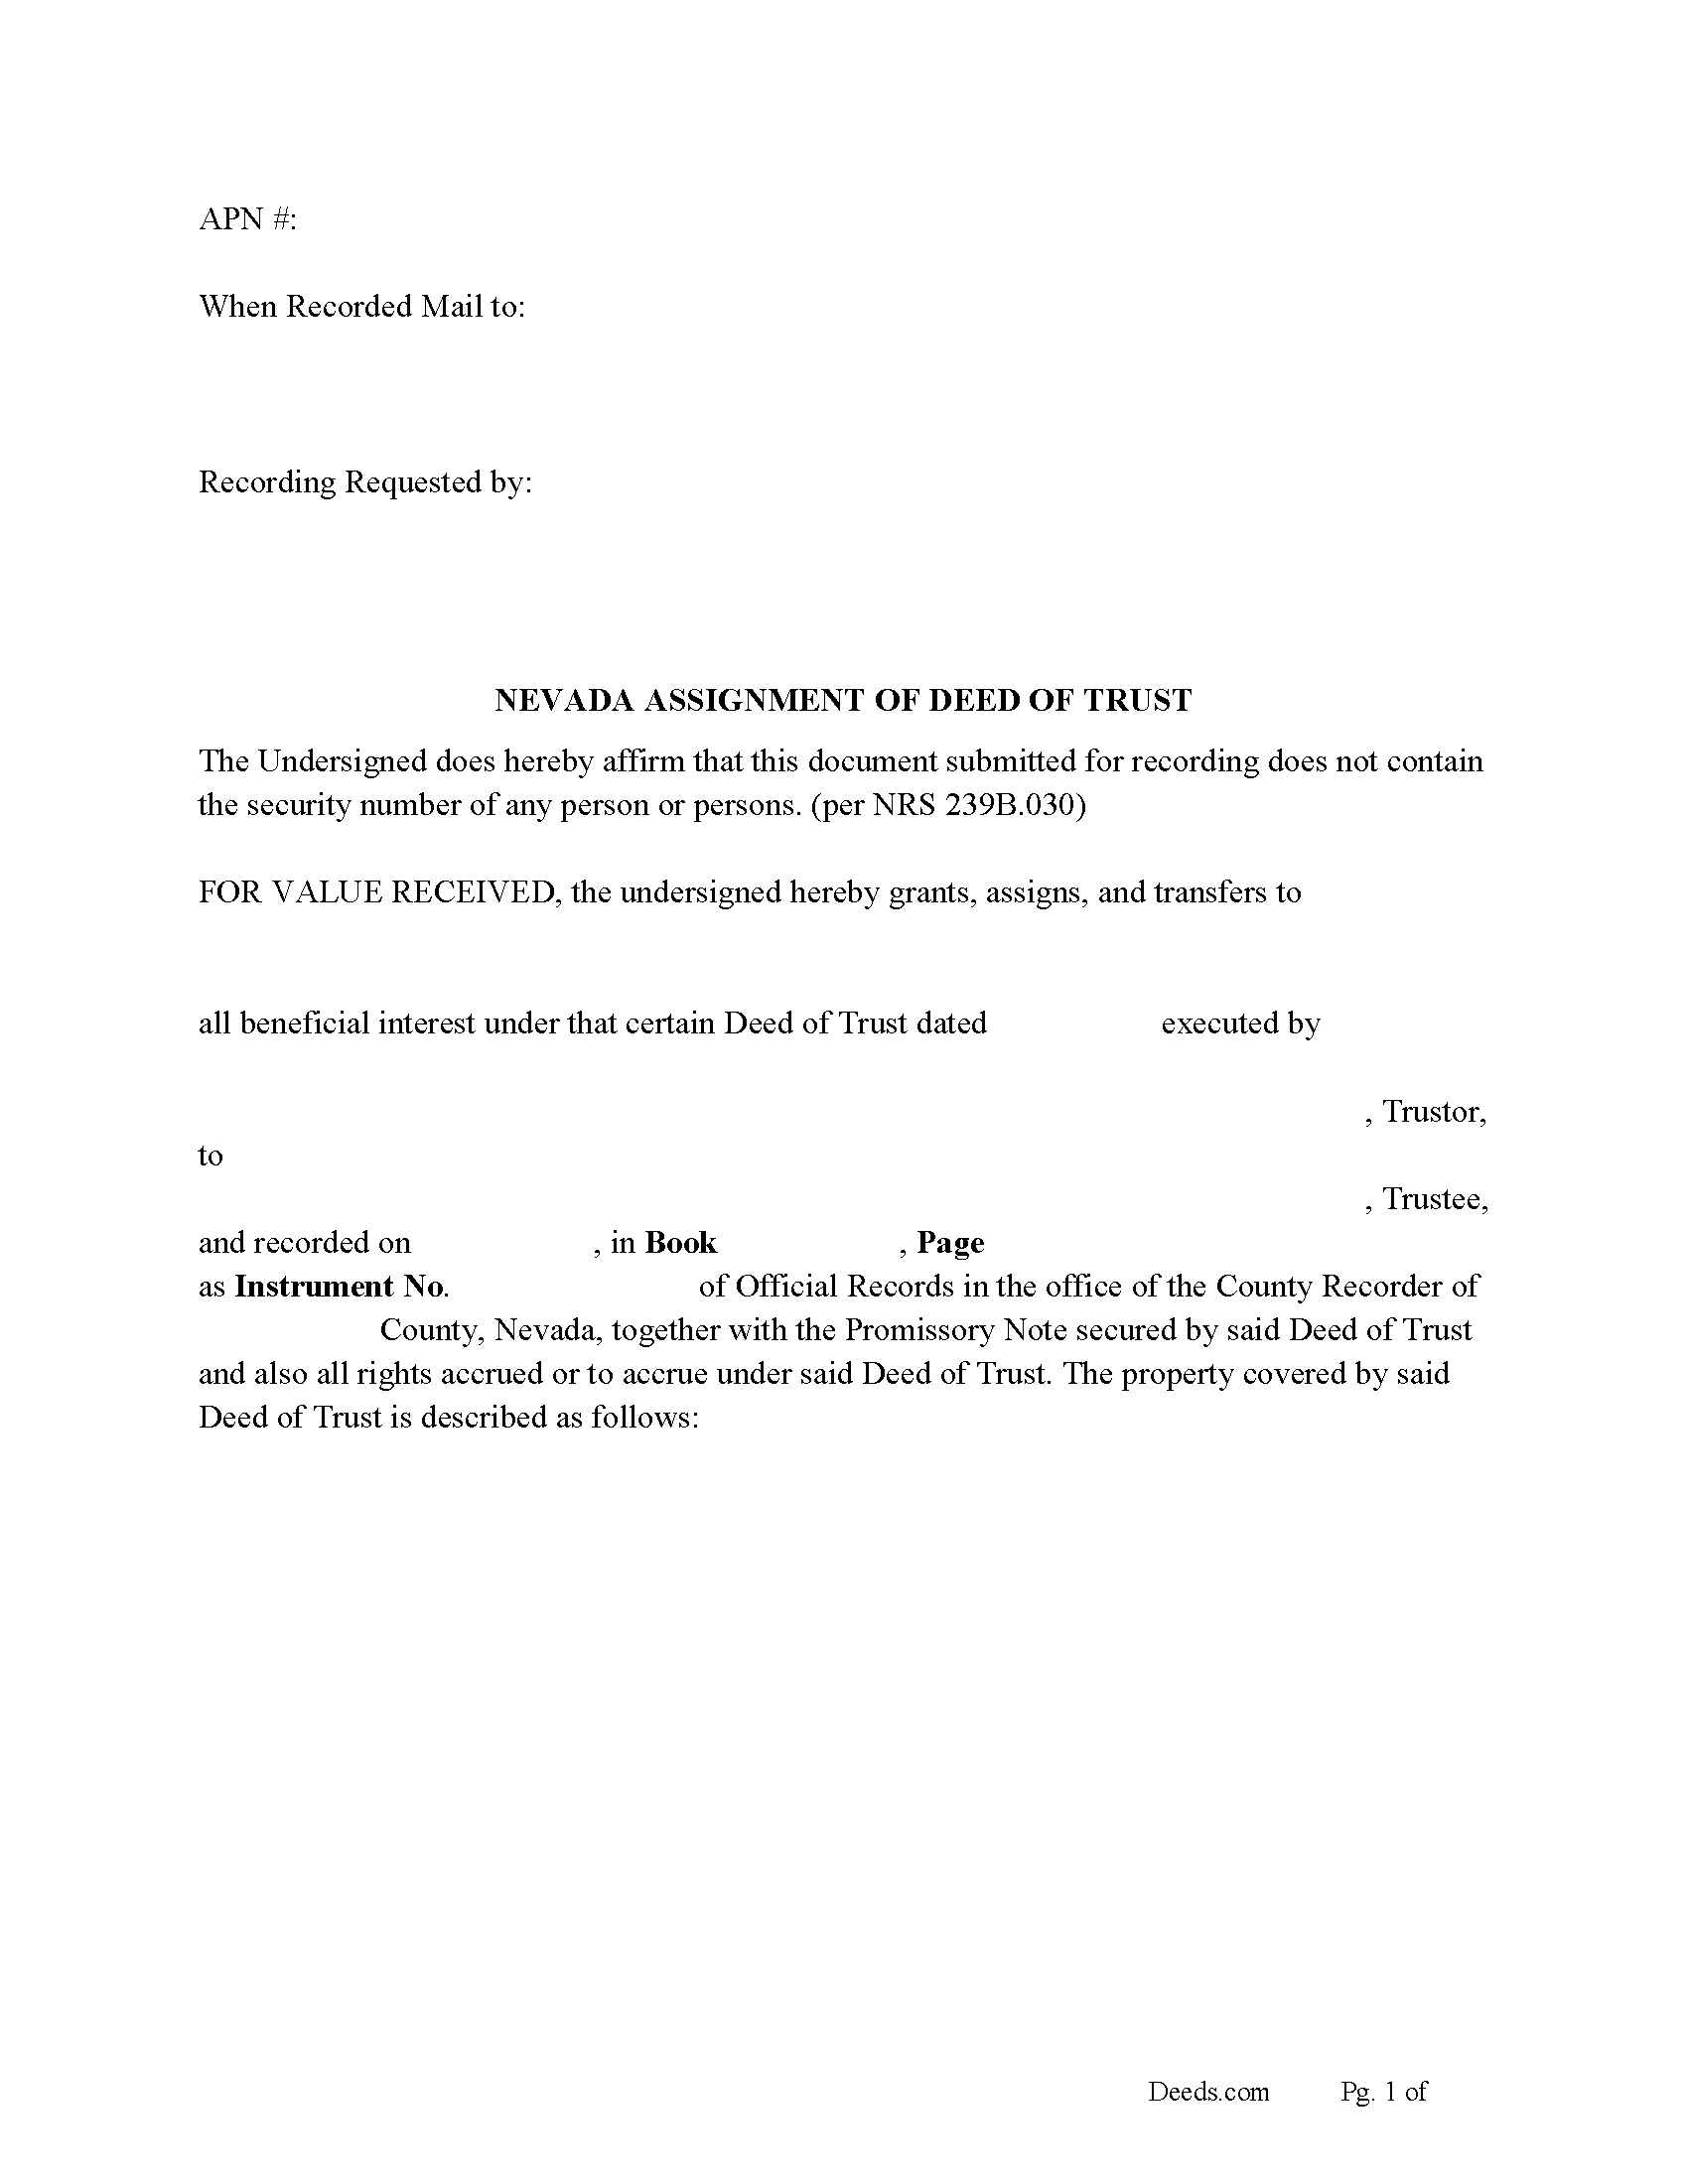 Assignment of Deed of Trust